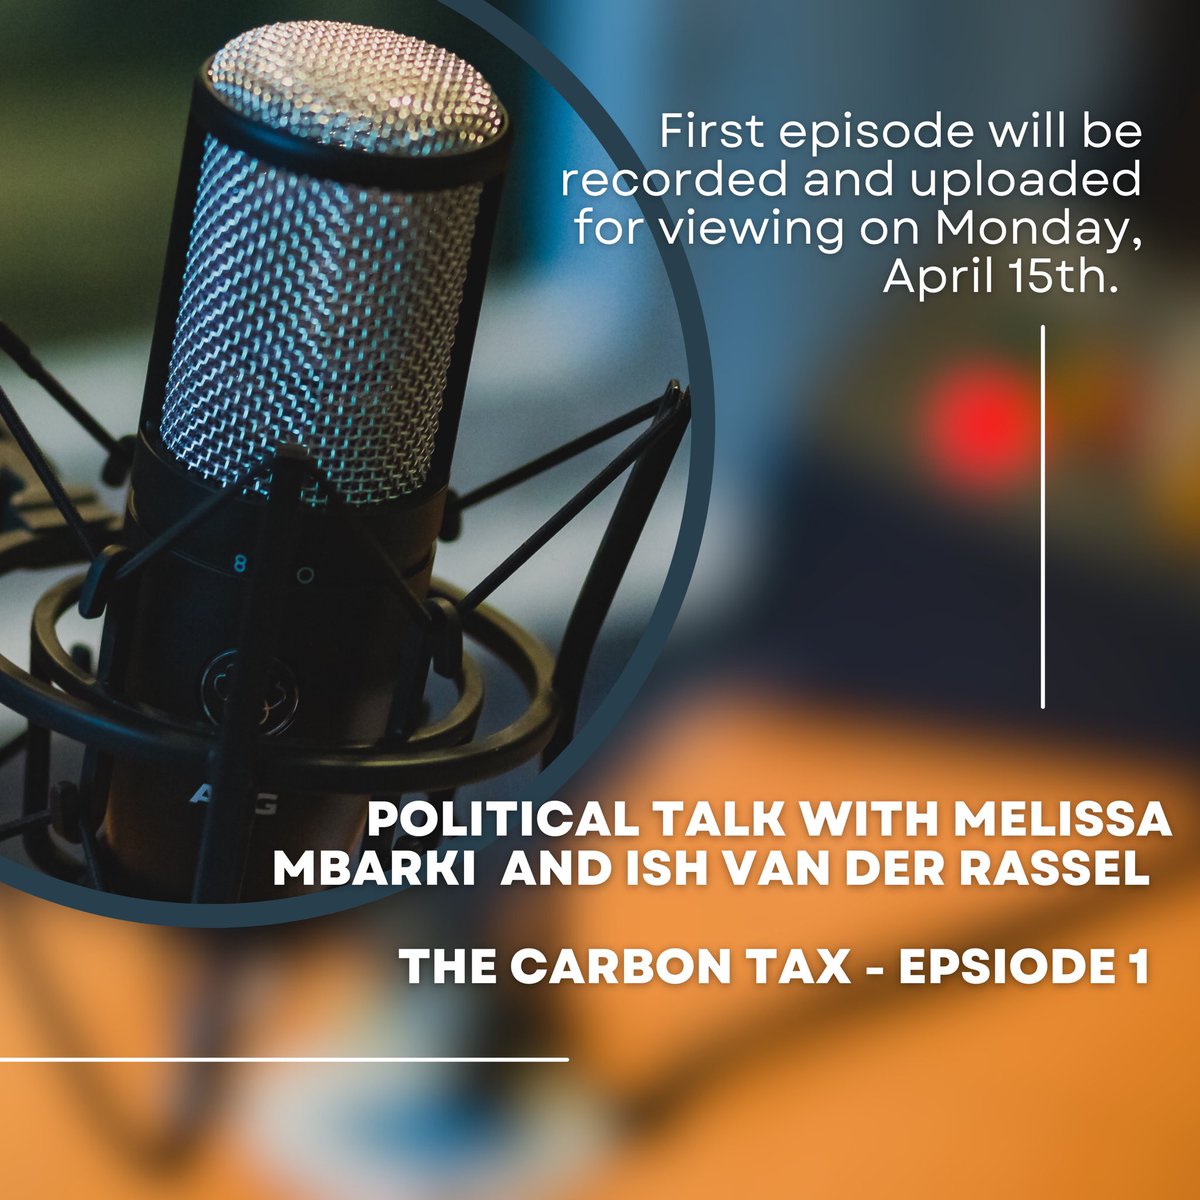 Our first episode is this weekend! Very exciting. Looking forward to discussing with my good friend @MelissaMbarki about the Carbon Tax and the impact it has on Canadians pocketbooks.